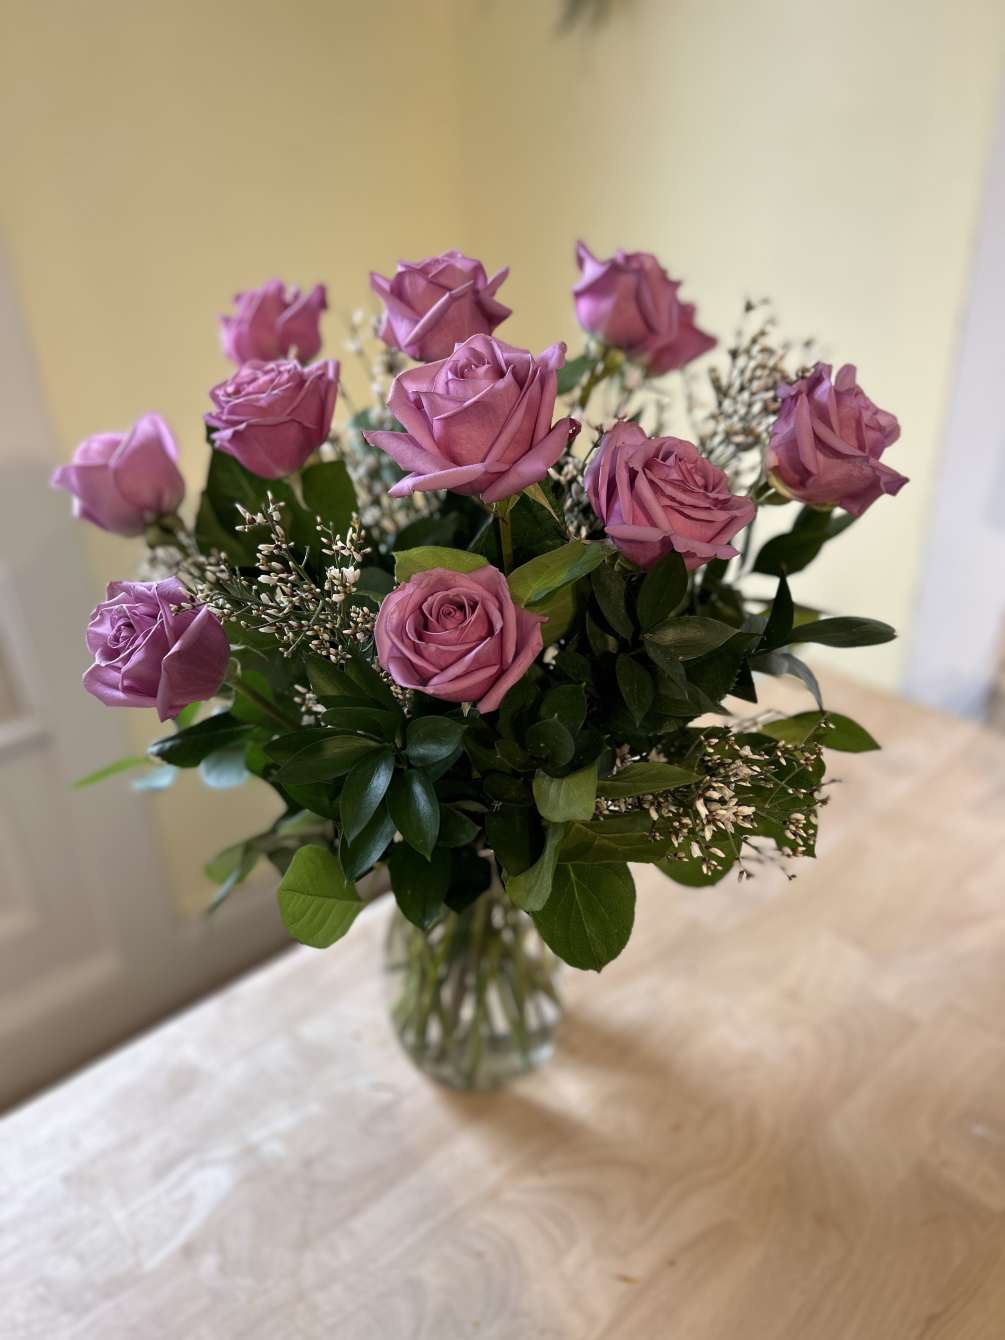 A gorgeous greeting for any occasion, this lovely lavender bouquet features one